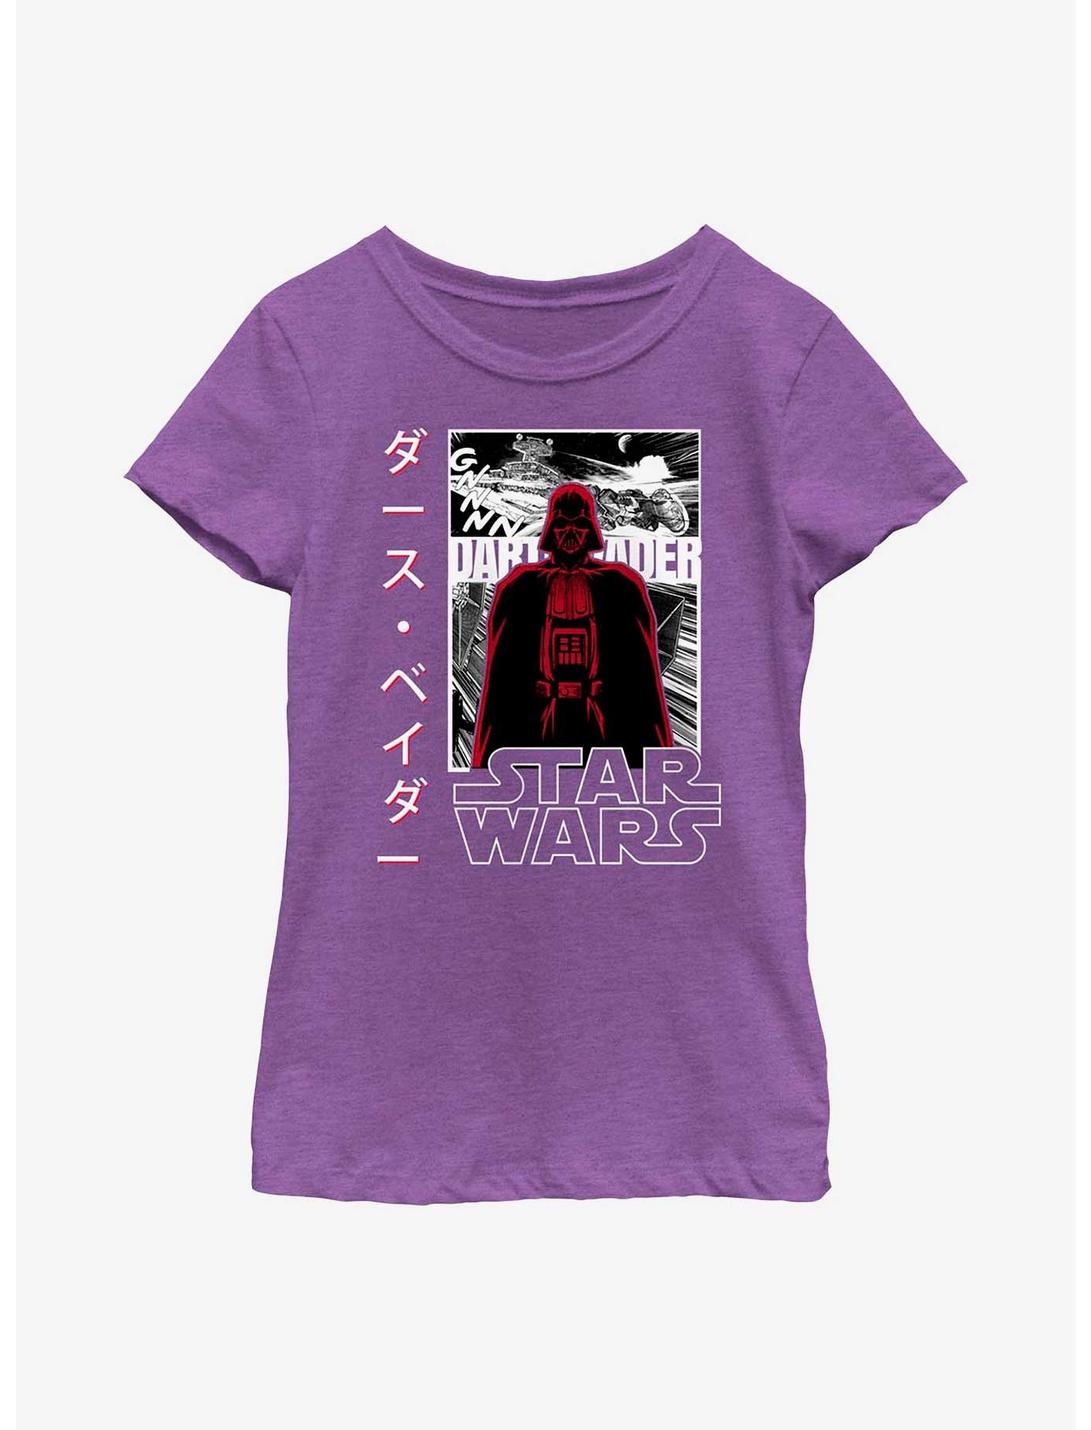 Star Wars Darth Vader in Japanese Youth Girls T-Shirt, PURPLE BERRY, hi-res